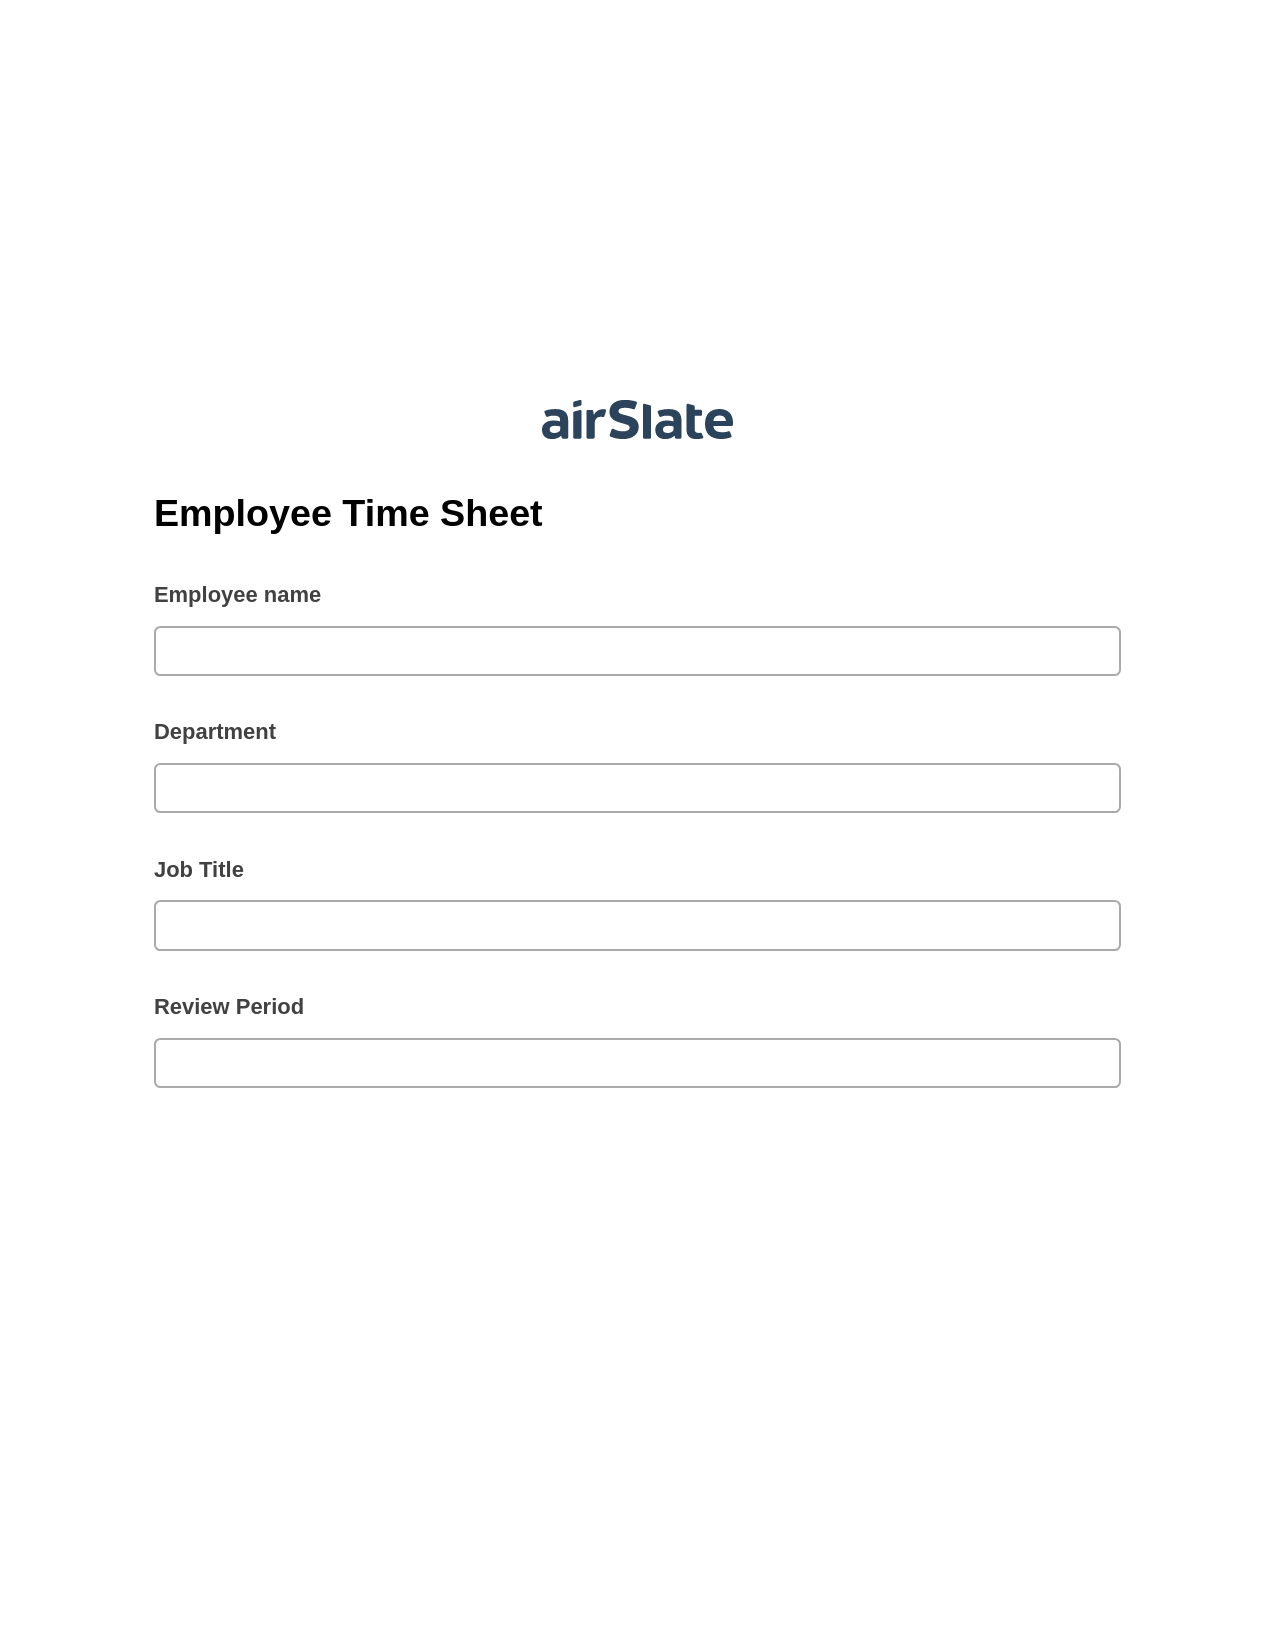 Employee Time Sheet Pre-fill from Google Sheets Bot, Update Audit Trail Bot, Export to Excel 365 Bot